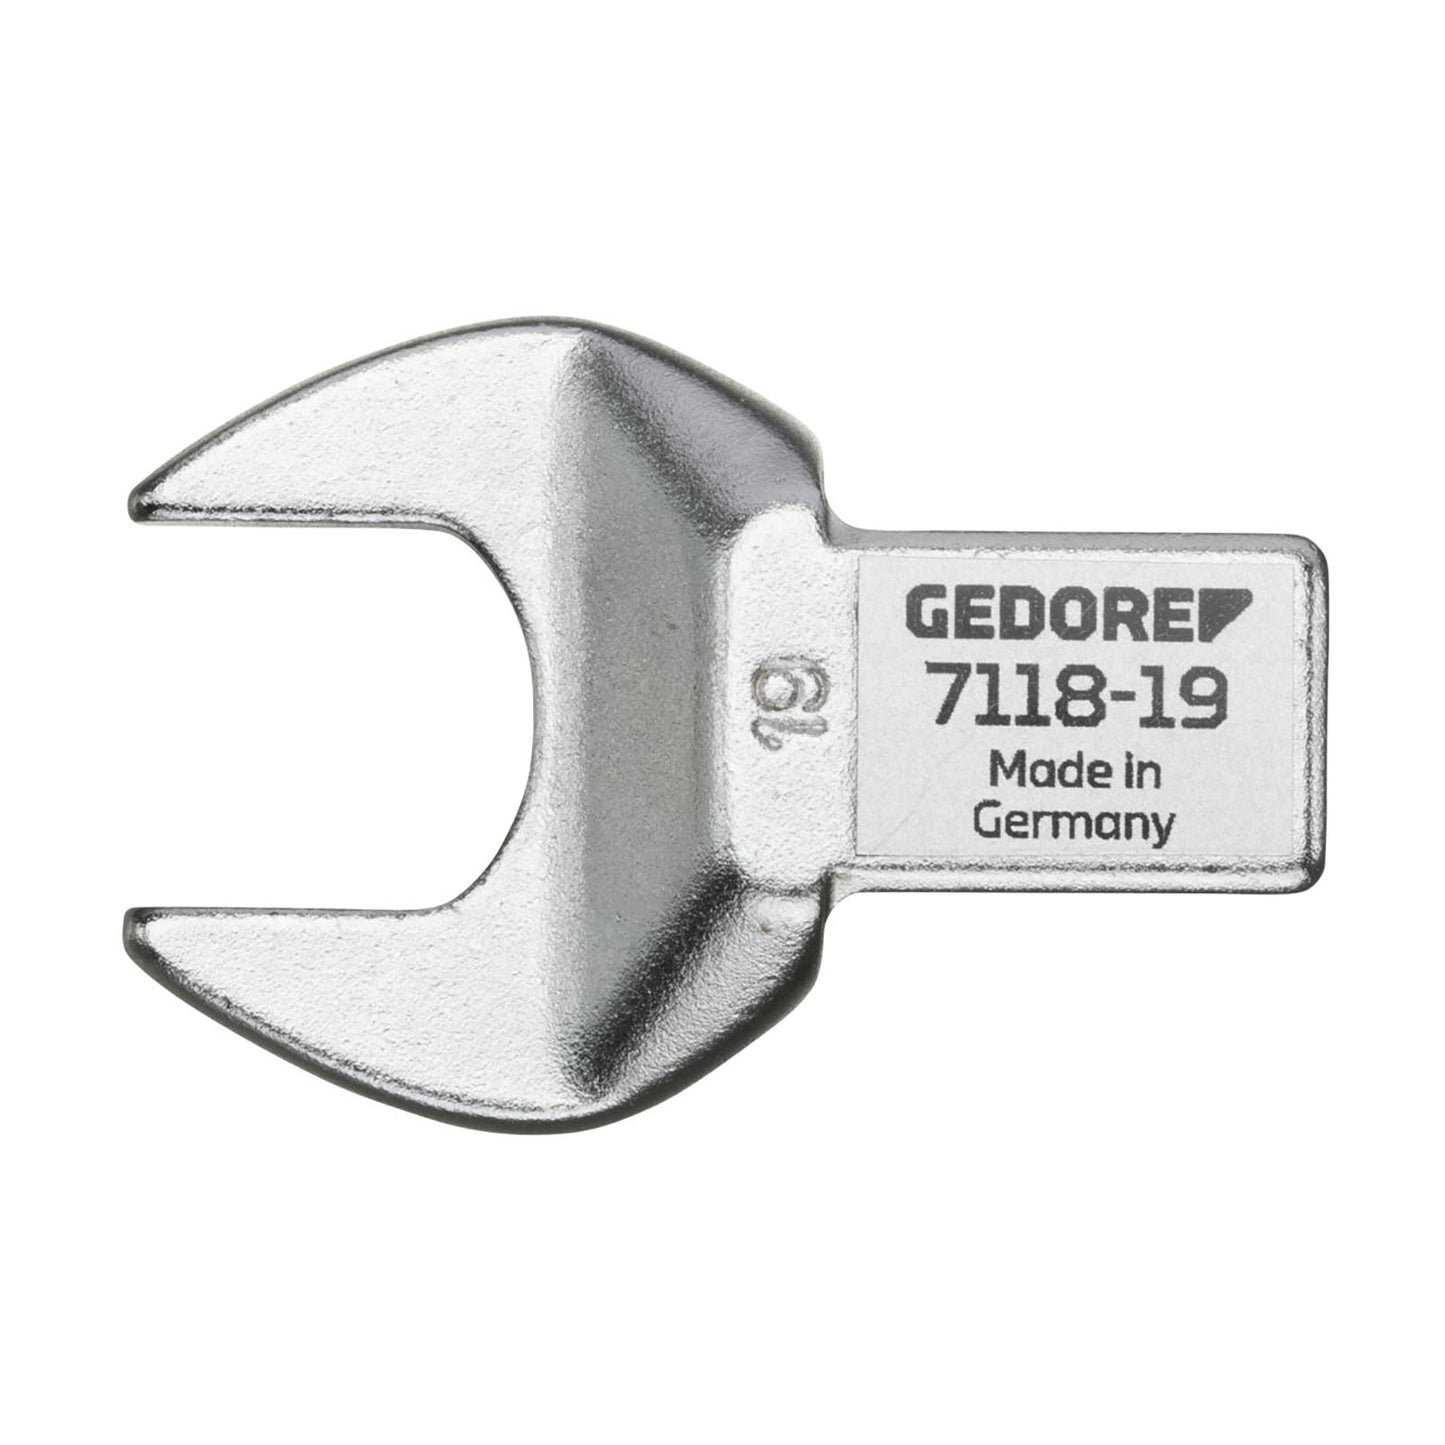 GEDORE 7118-36 - Open end wrench 14x18, 36mm (1963716)